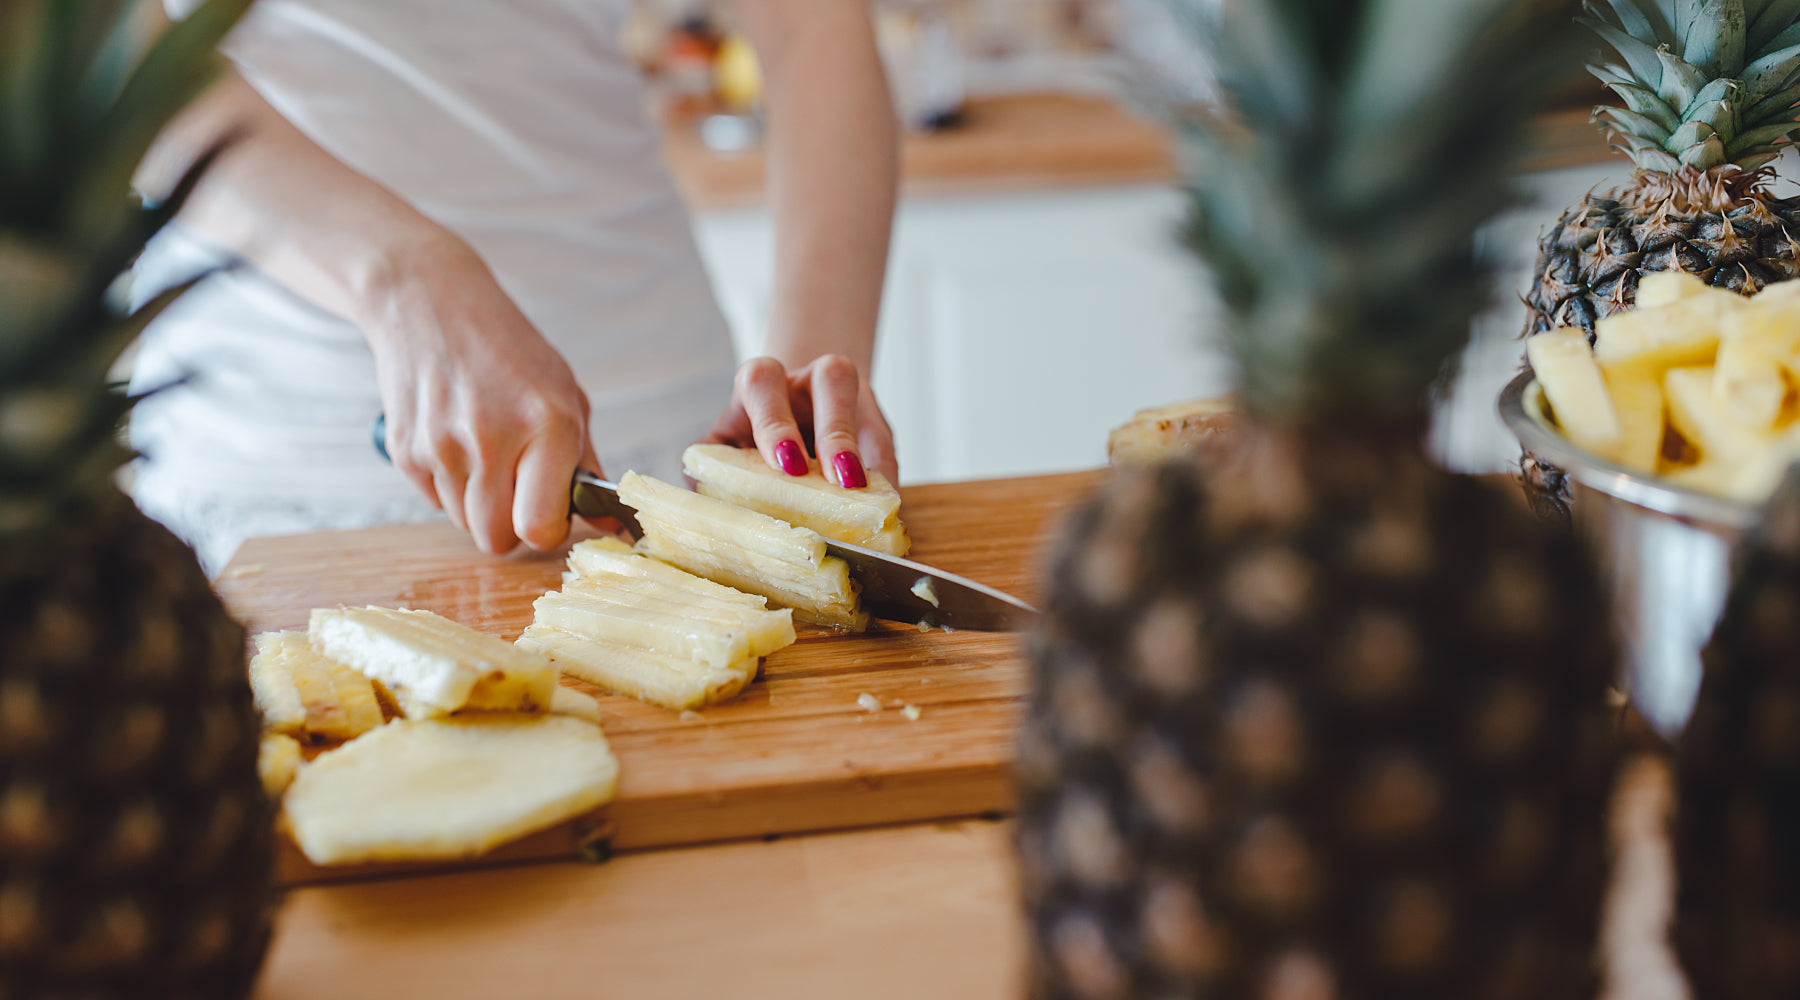 A person cutting up a pineapple with a knife.